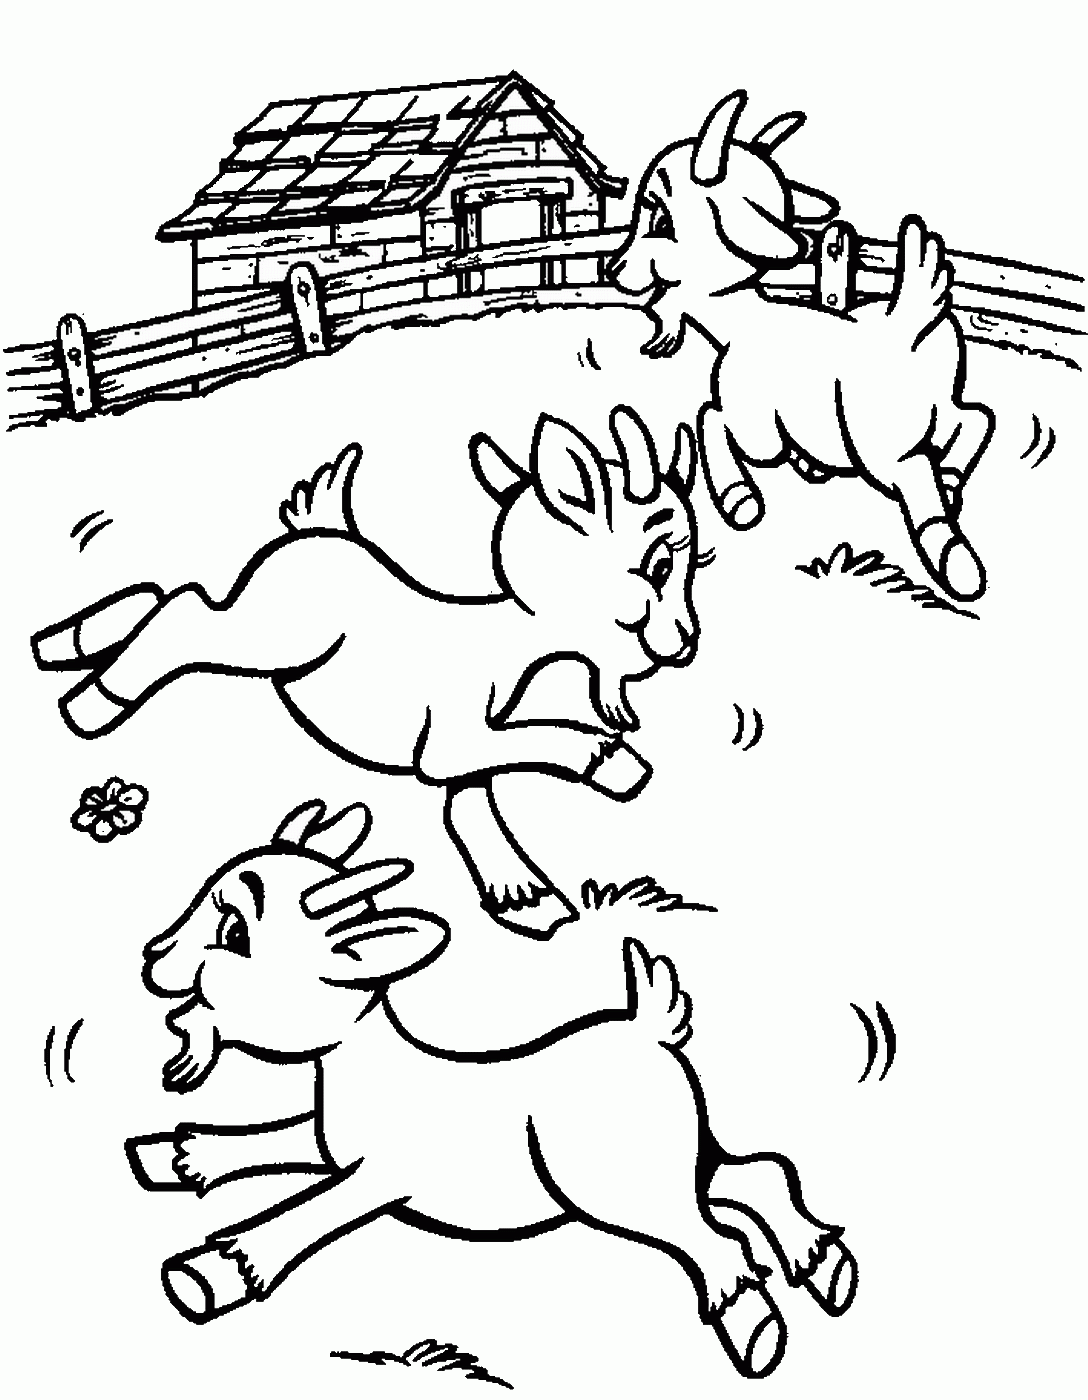 3 Billy Goats Gruff Coloring Pages Sketch Coloring Page